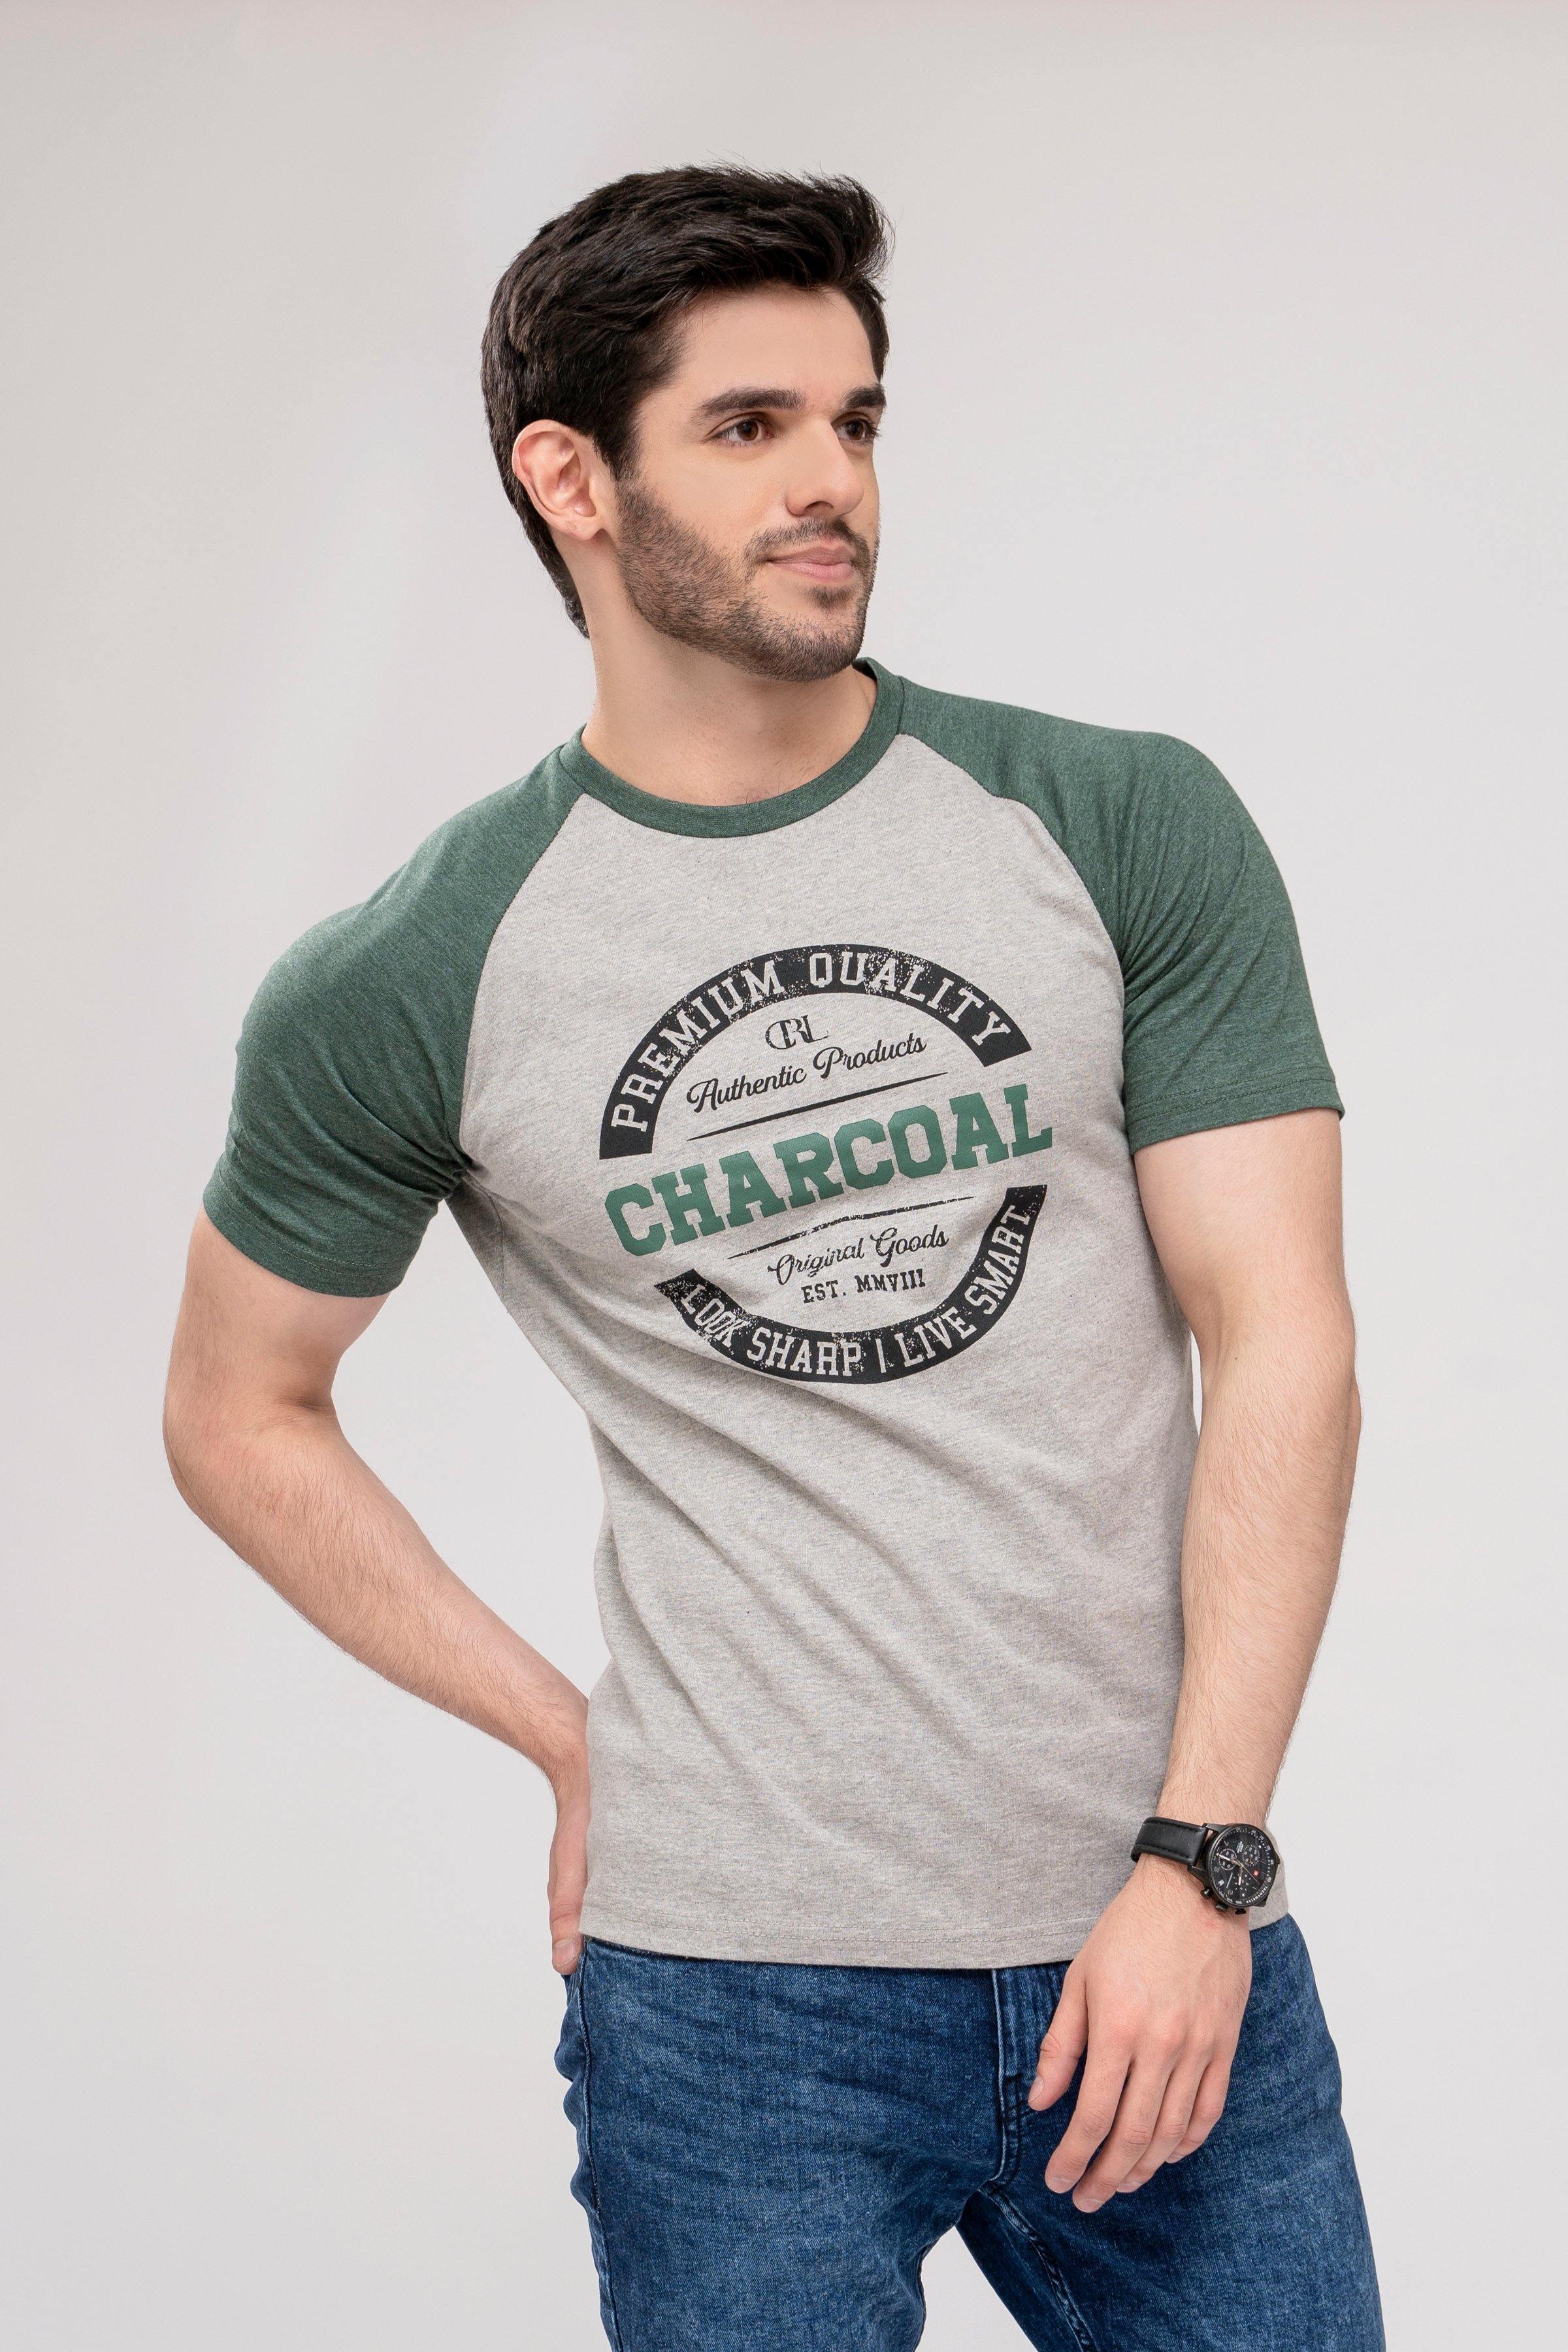 T SHIRT ROUND NECK GREY GREEN at Charcoal Clothing